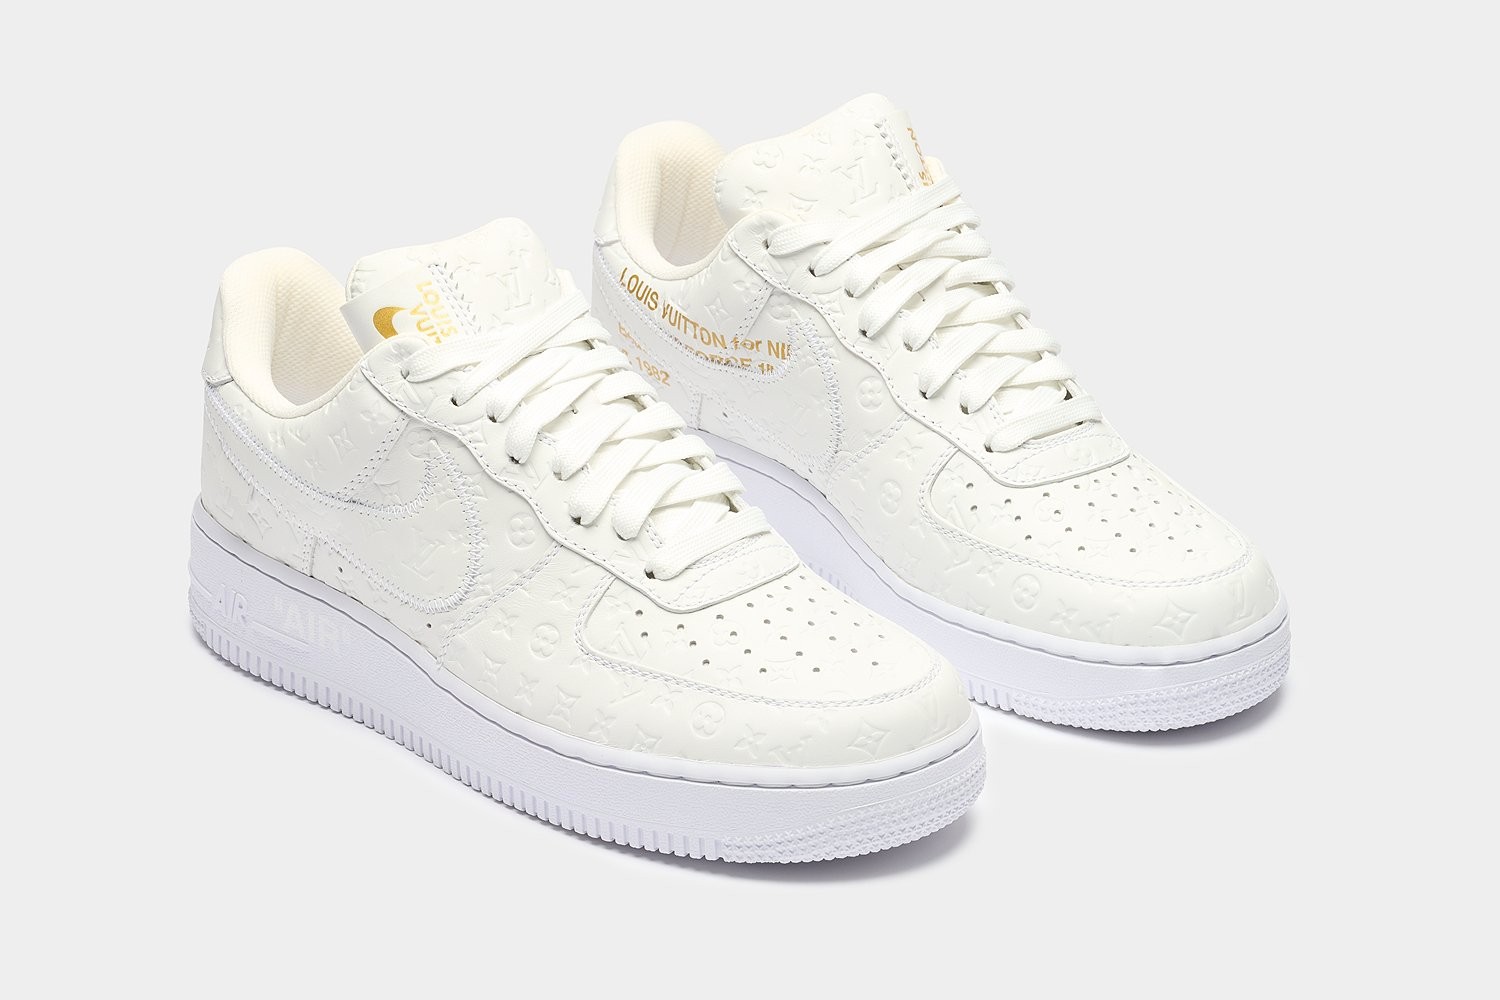 A complete series of nine Louis Vuitton and Nike “Air Force 1” by Virgil Abloh - Image 7 of 50